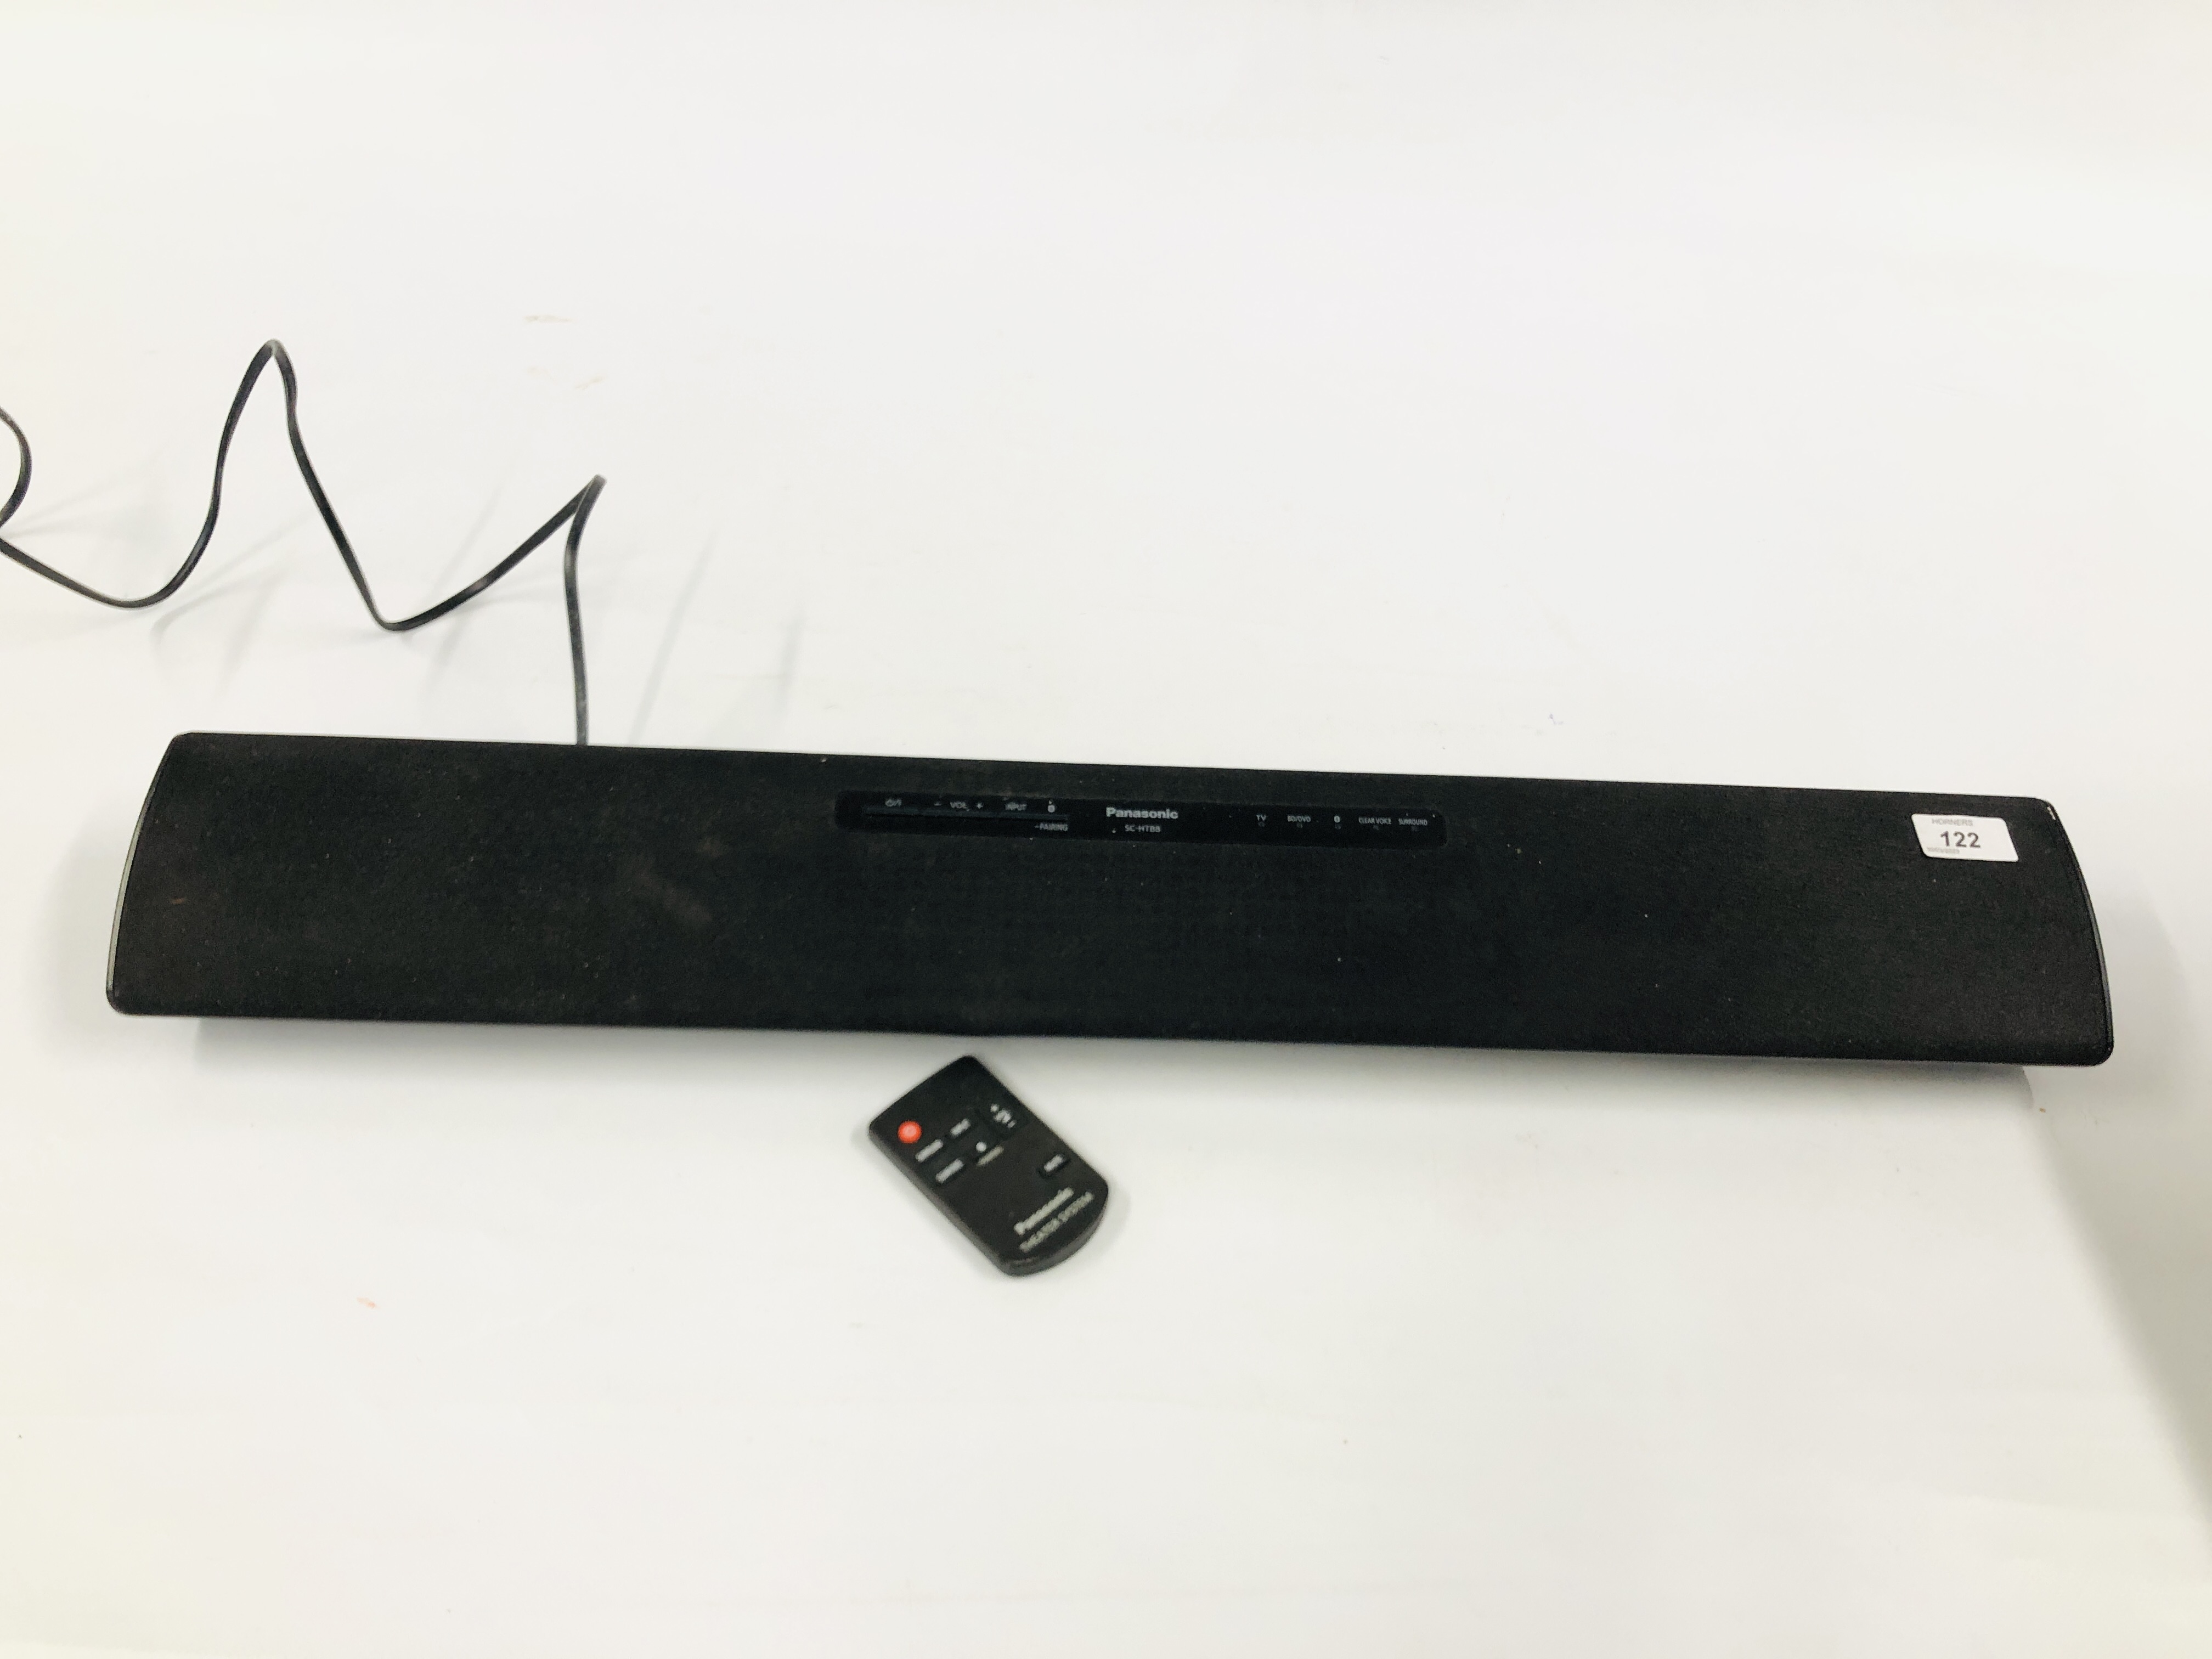 A PANASONIC SOUND BAR WITH REMOTE - MODEL SC-HTD8 - SOLD AS SEEN.